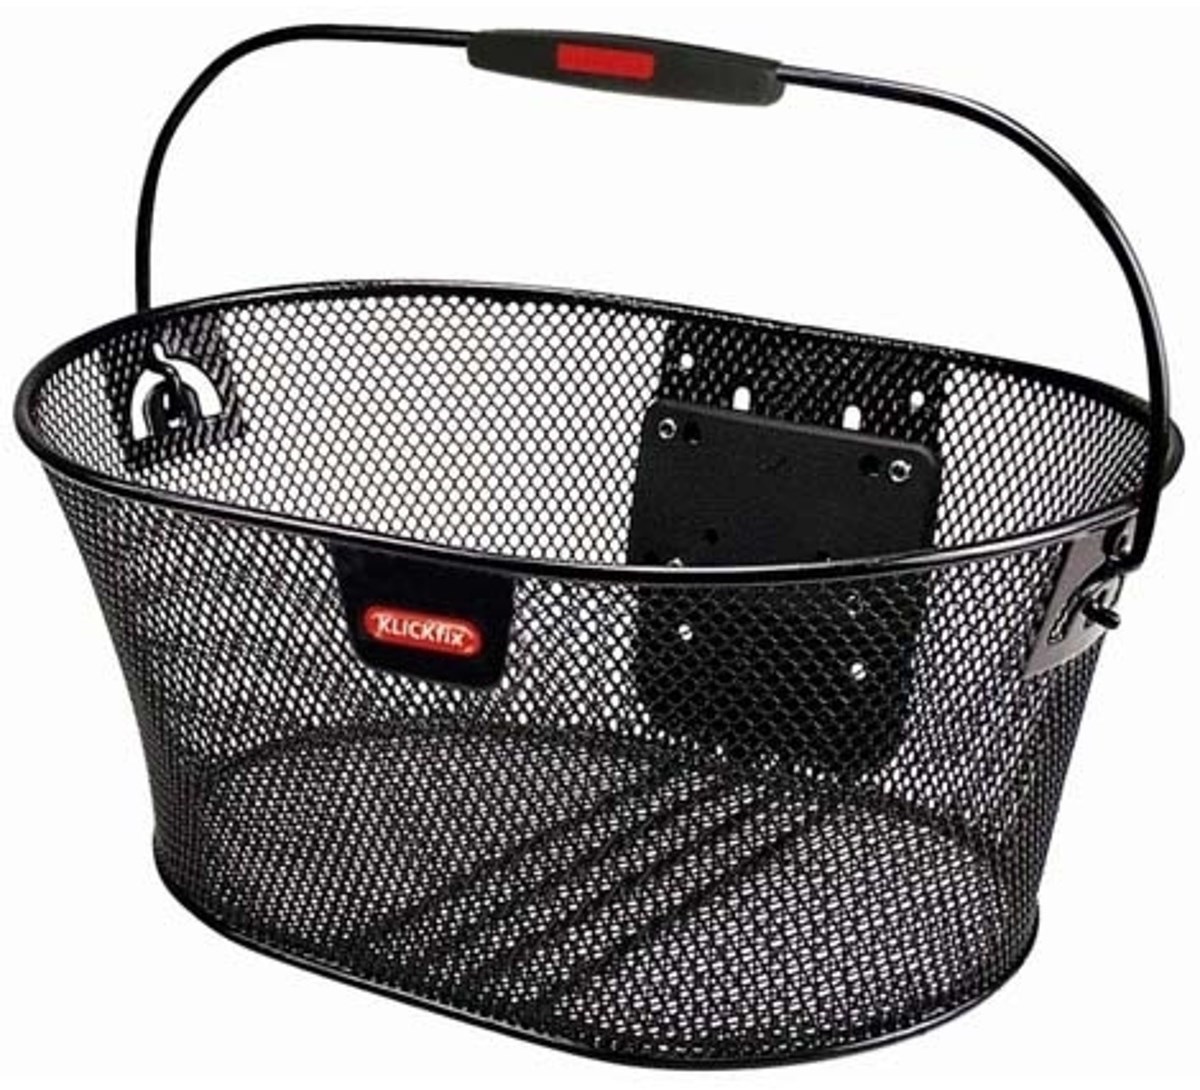 Rixen Kaul Mesh Basket With Oval Shape and Reduced Height product image